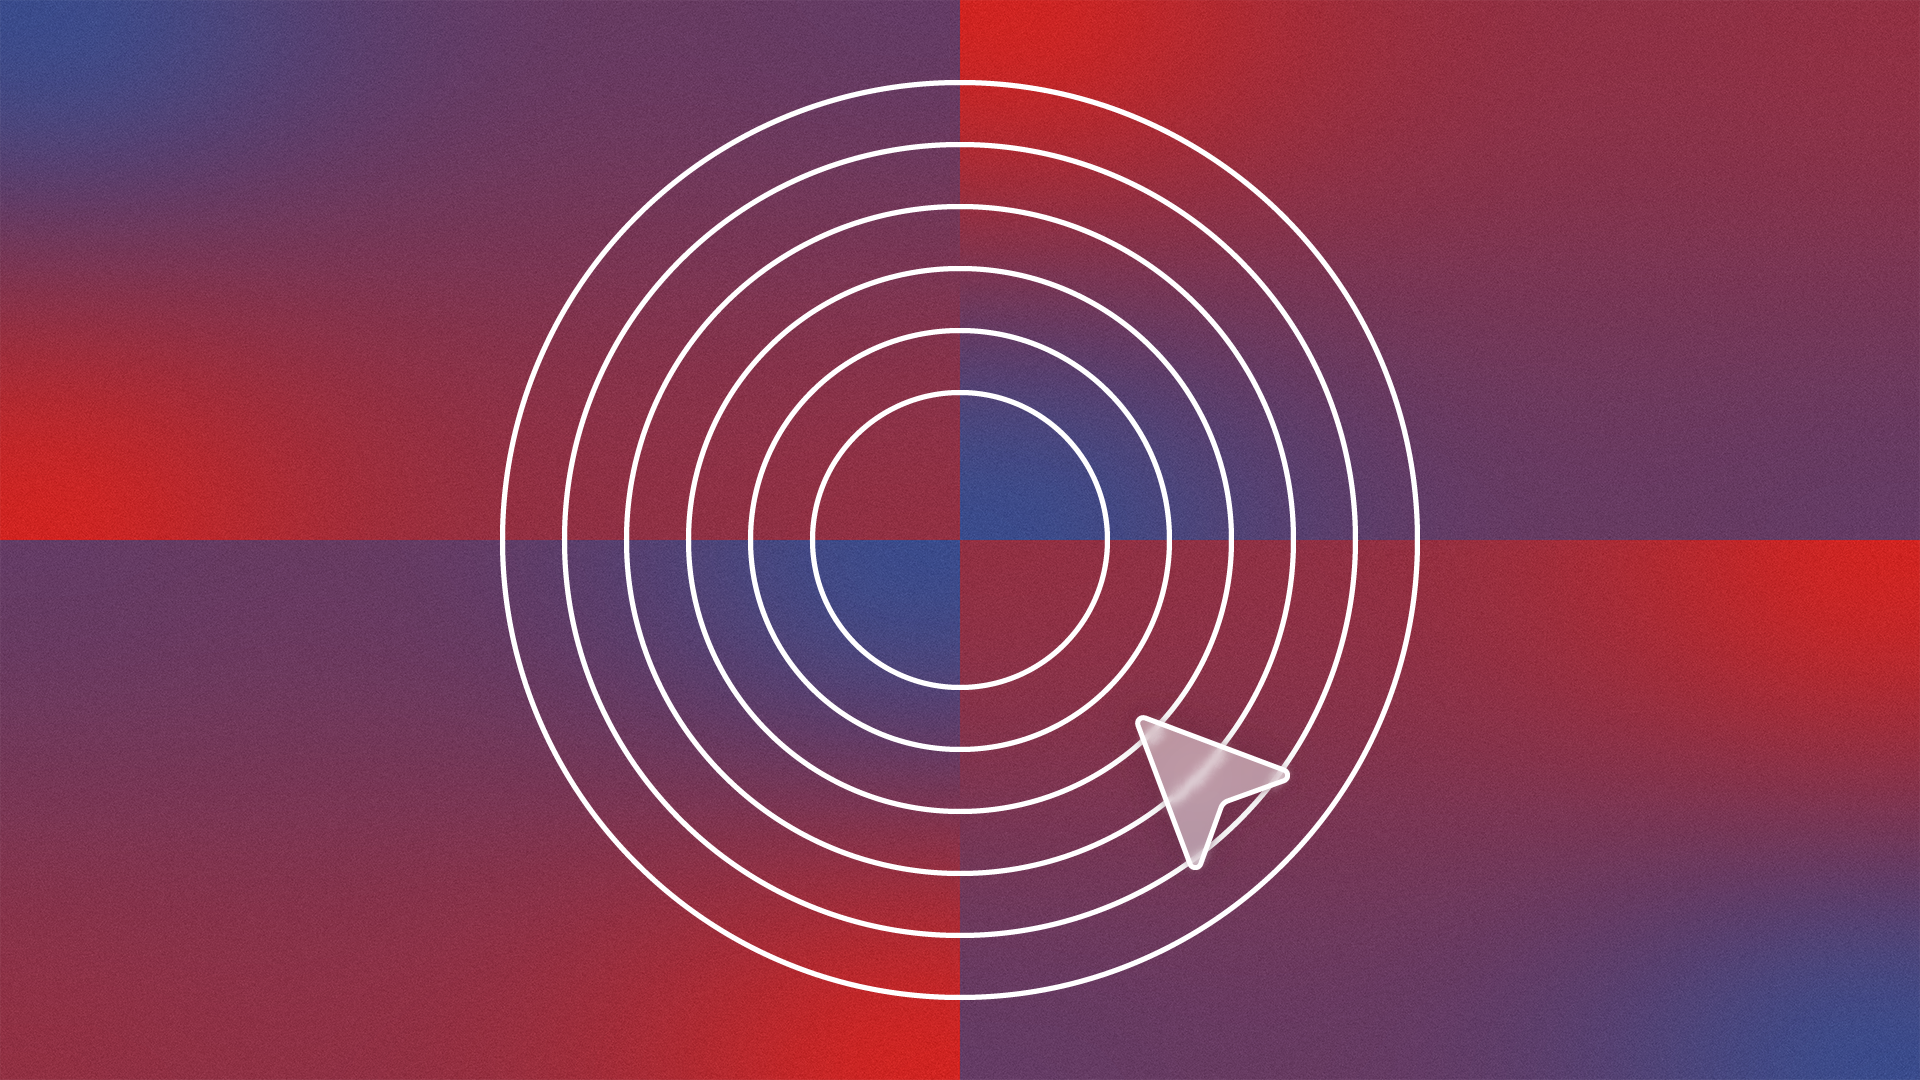 Concentric circles on top of a gradient background